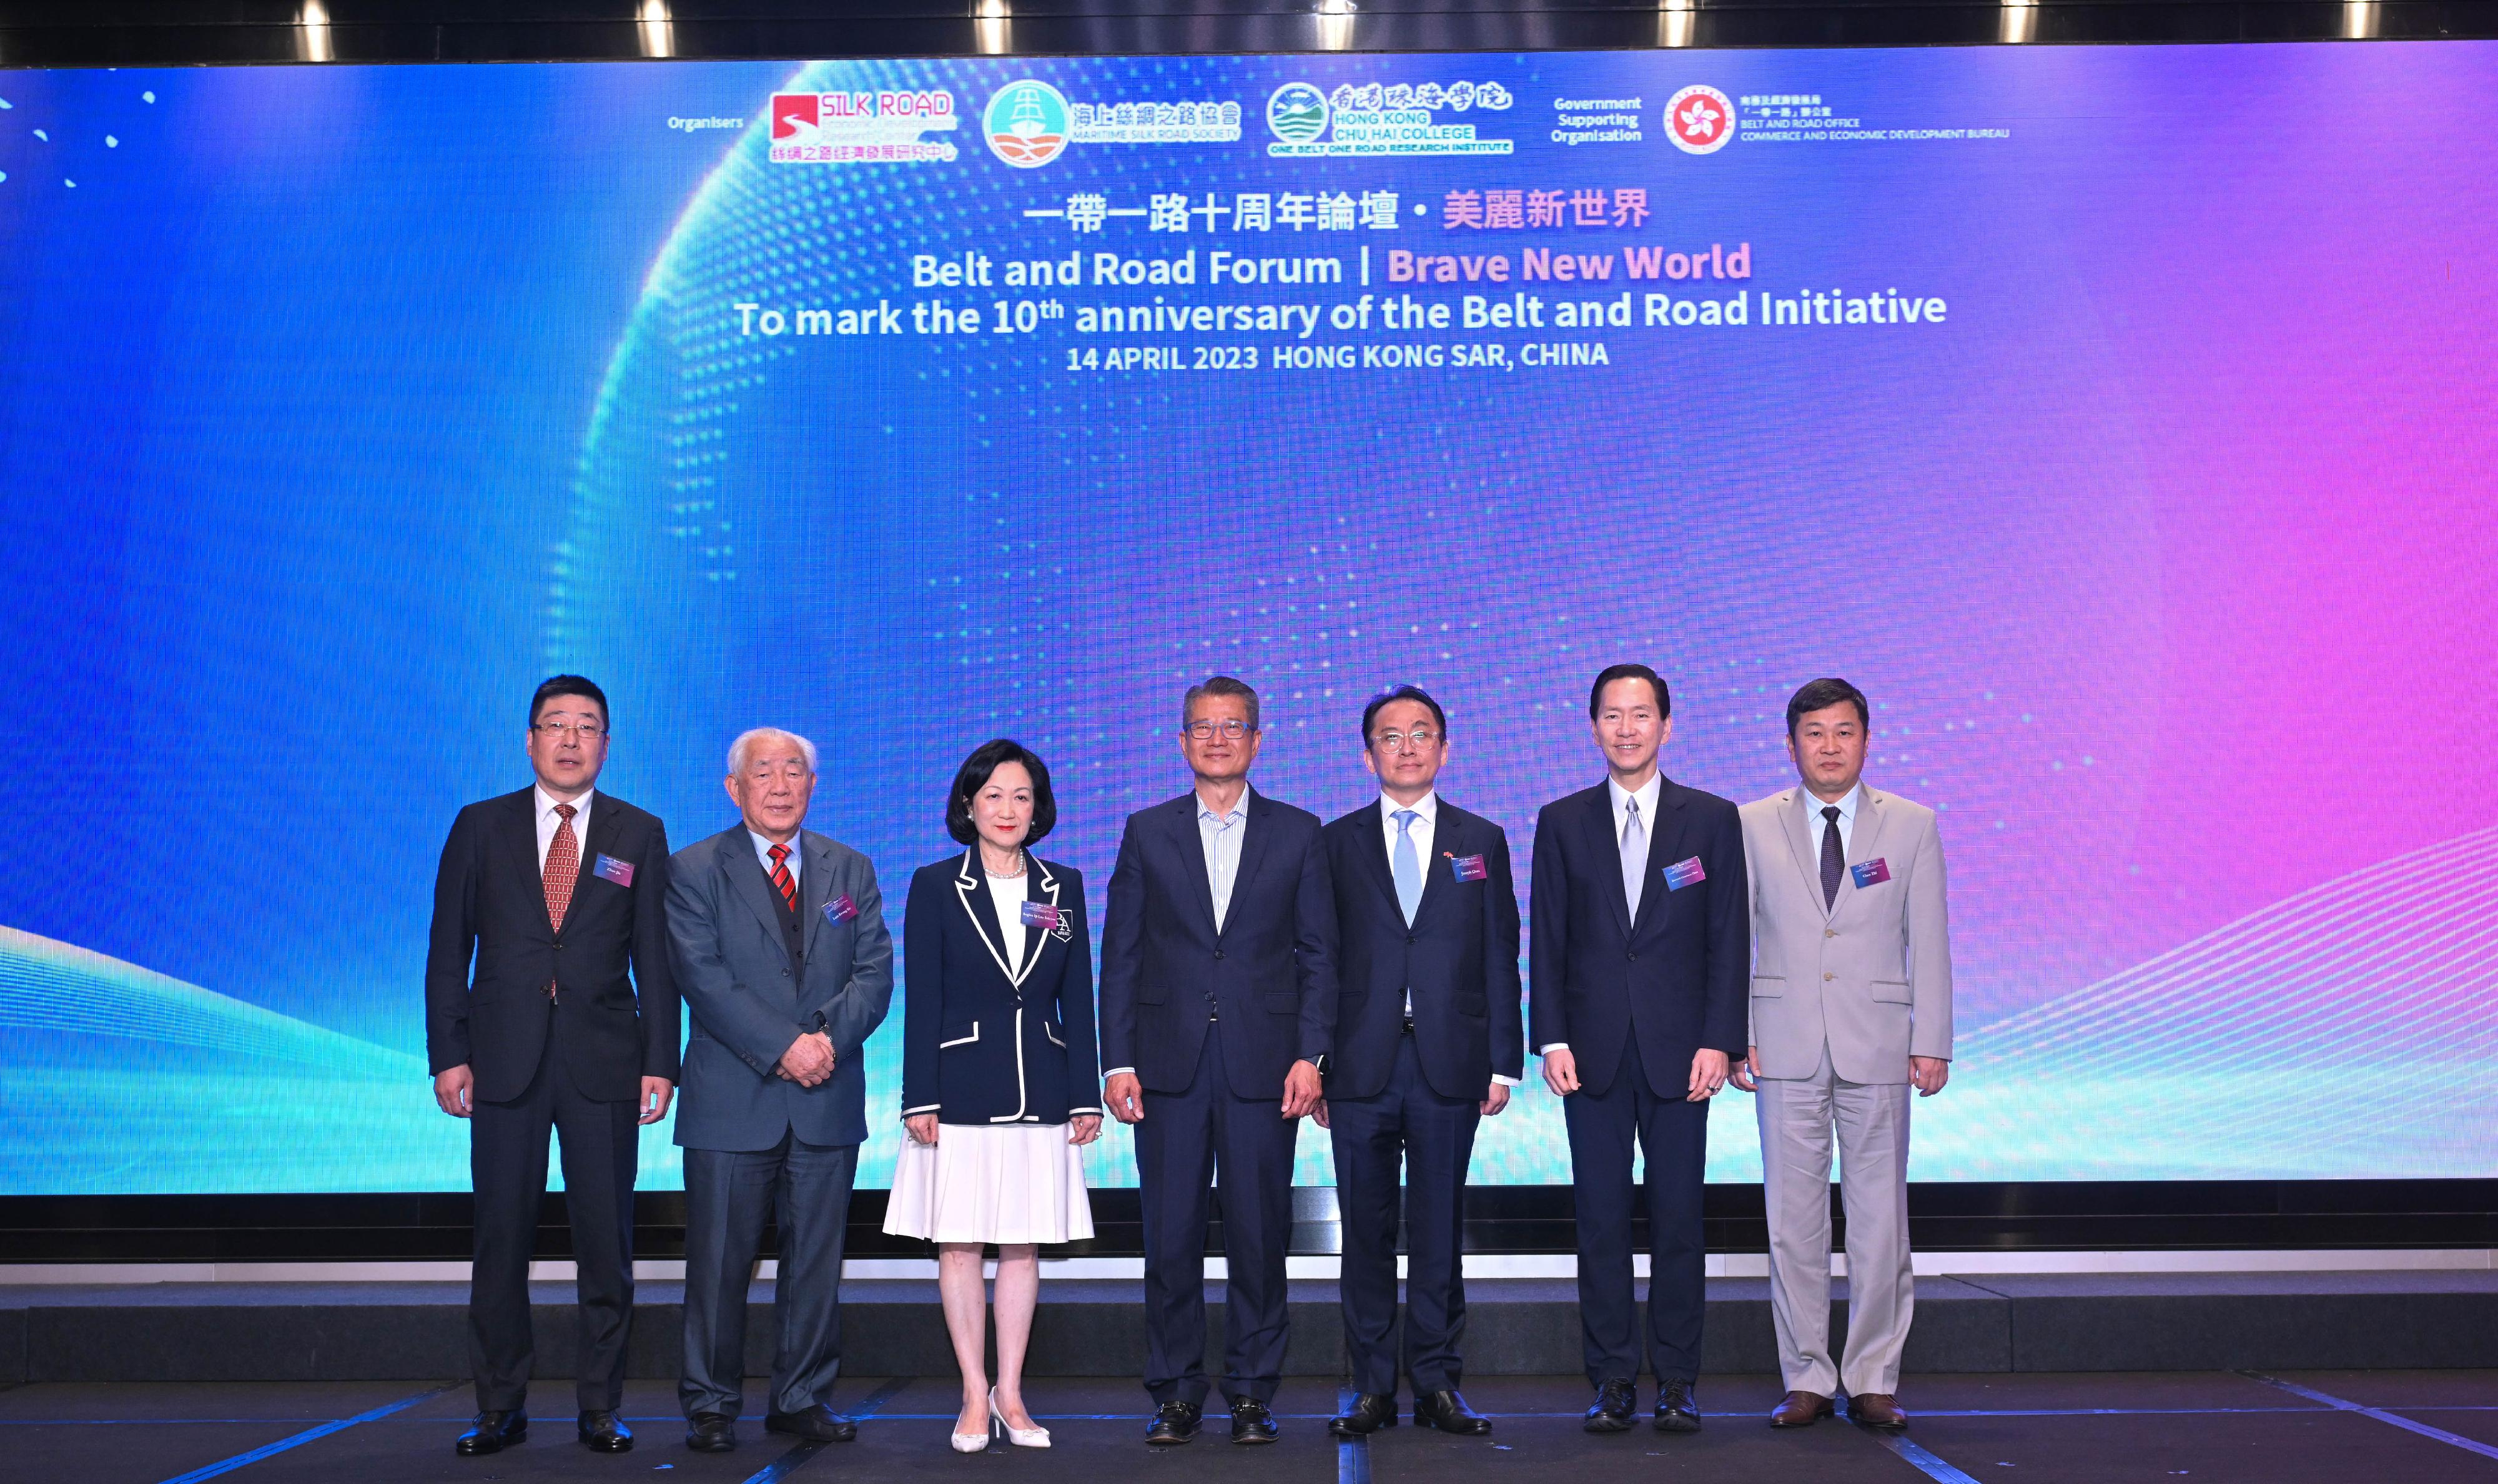 The Financial Secretary, Mr Paul Chan, attended the Belt and Road Forum – "Brave New World" today (April 14). Photo shows (from third left) Co-Chair of the Maritime Silk Road Society Mrs Regina Ip; Mr Chan; the Chairman of the Silk Road Economic Development Research Center, Mr Joseph Chan; Co-Chair of the Maritime Silk Road Society Mr Bernard Chan, and other guests at the event.